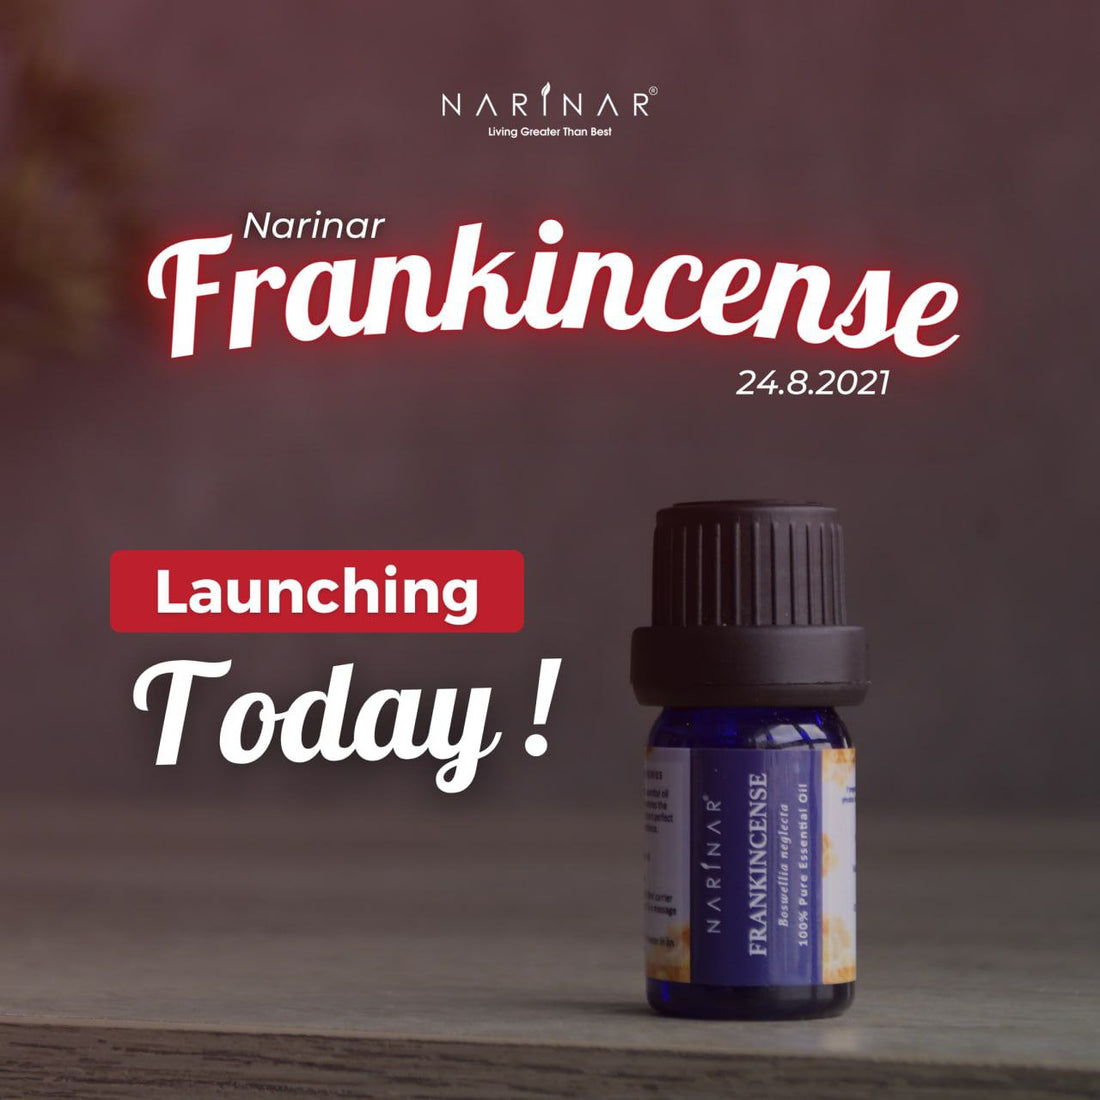 NIKMATI AROMA "THE KING OF OILS" FRANKINCENSE ESSENTIAL OIL